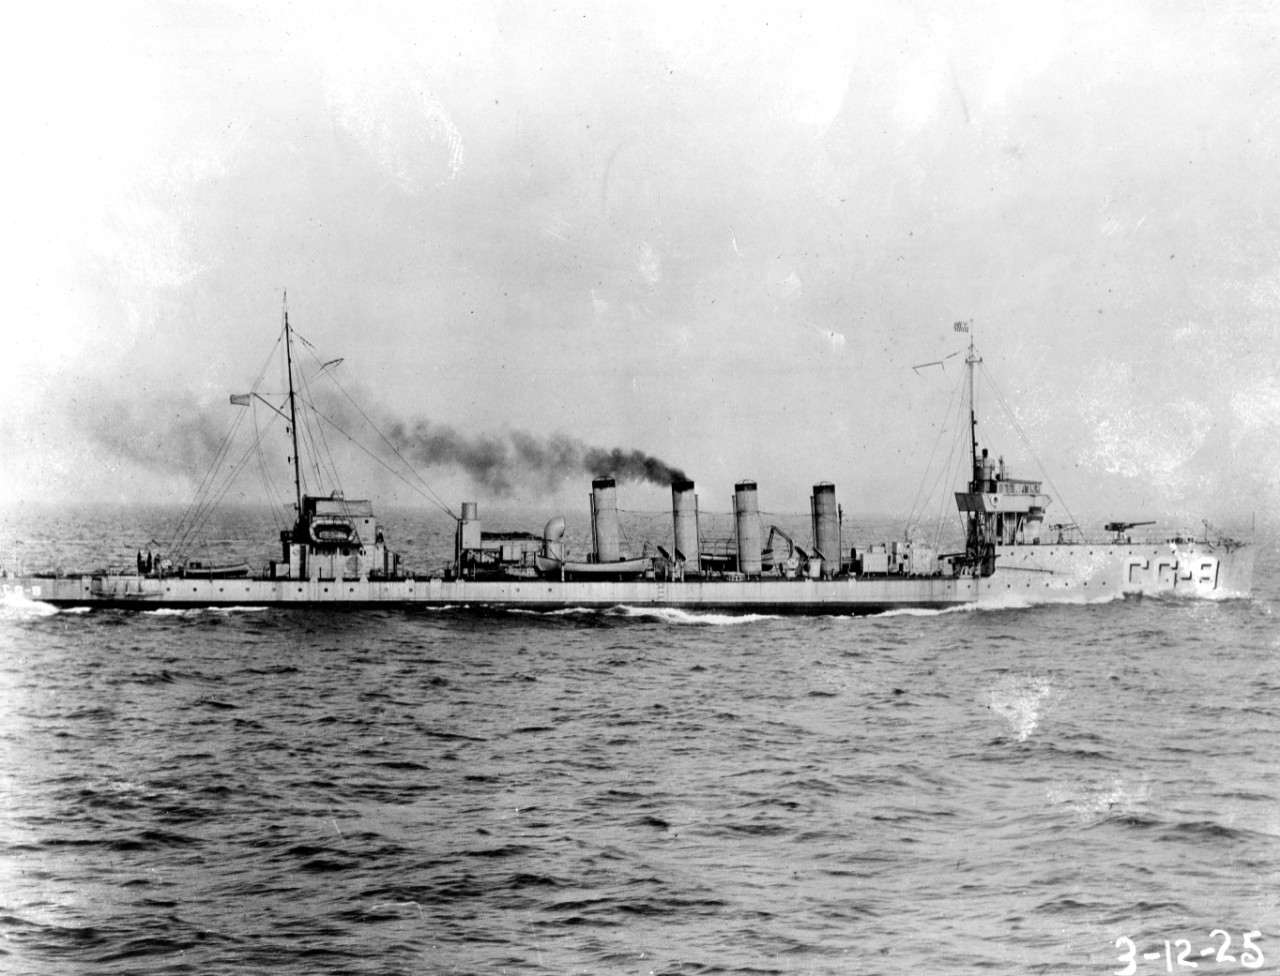 Beale underway as a Coast Guard destroyer, CG-9, 12 March 1925. (U.S. Coast Guard Historian’s Office Photograph, 12 March 1925).